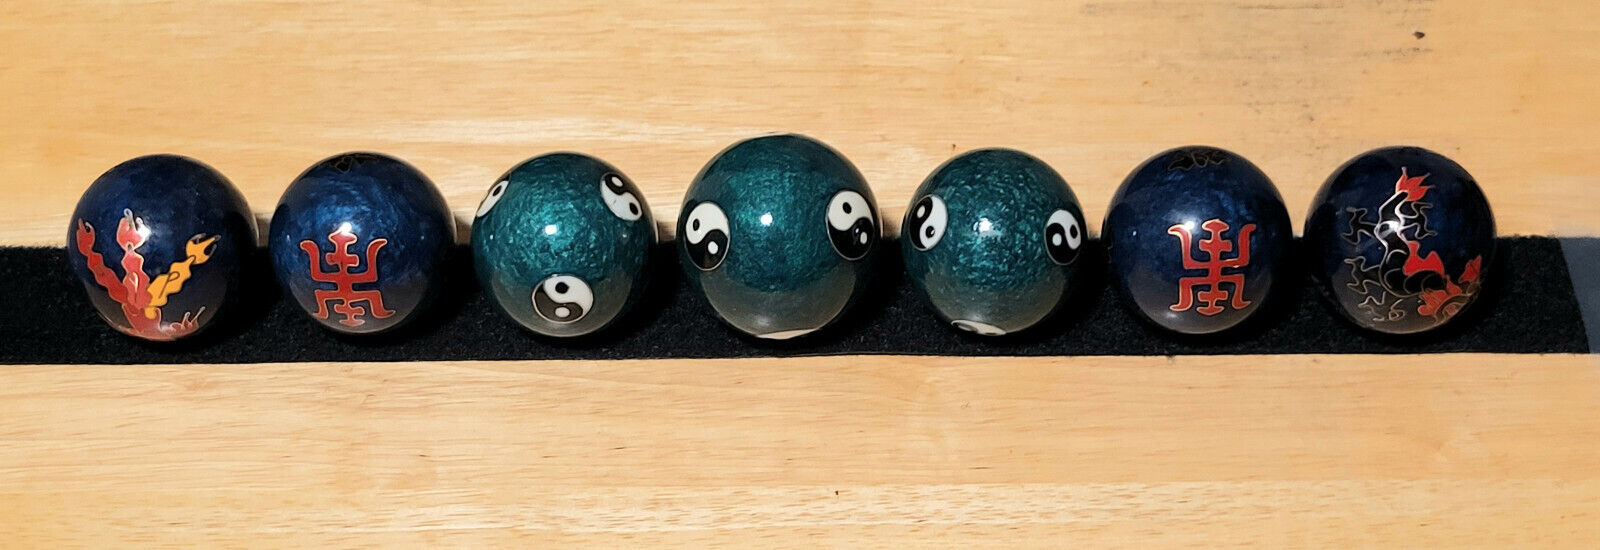 BOADING BALLS Yin Yang design Chinese Health Therapy Exercise. 7 total balls